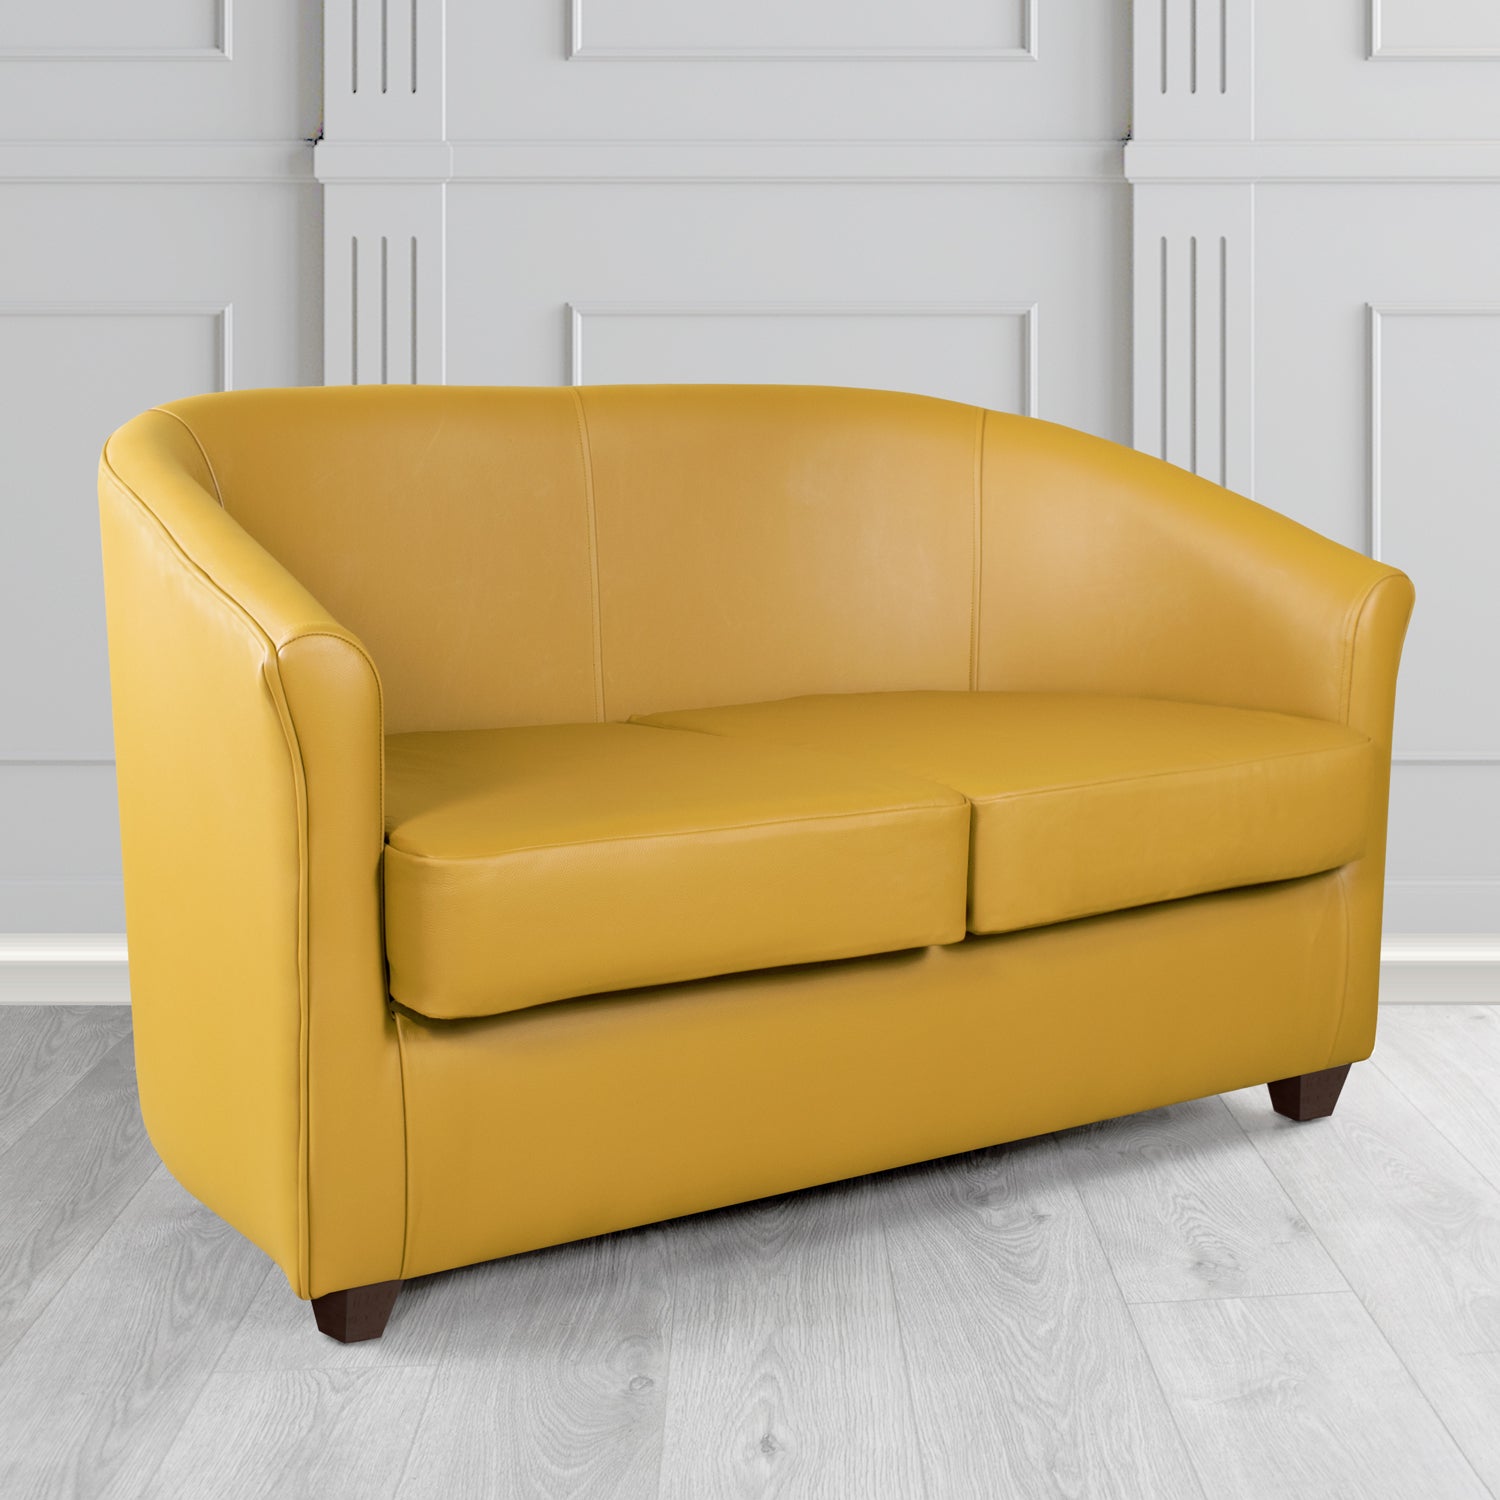 Cannes 2 Seater Tub Sofa in Just Colour Golden Honey Crib 5 Faux Leather - The Tub Chair Shop